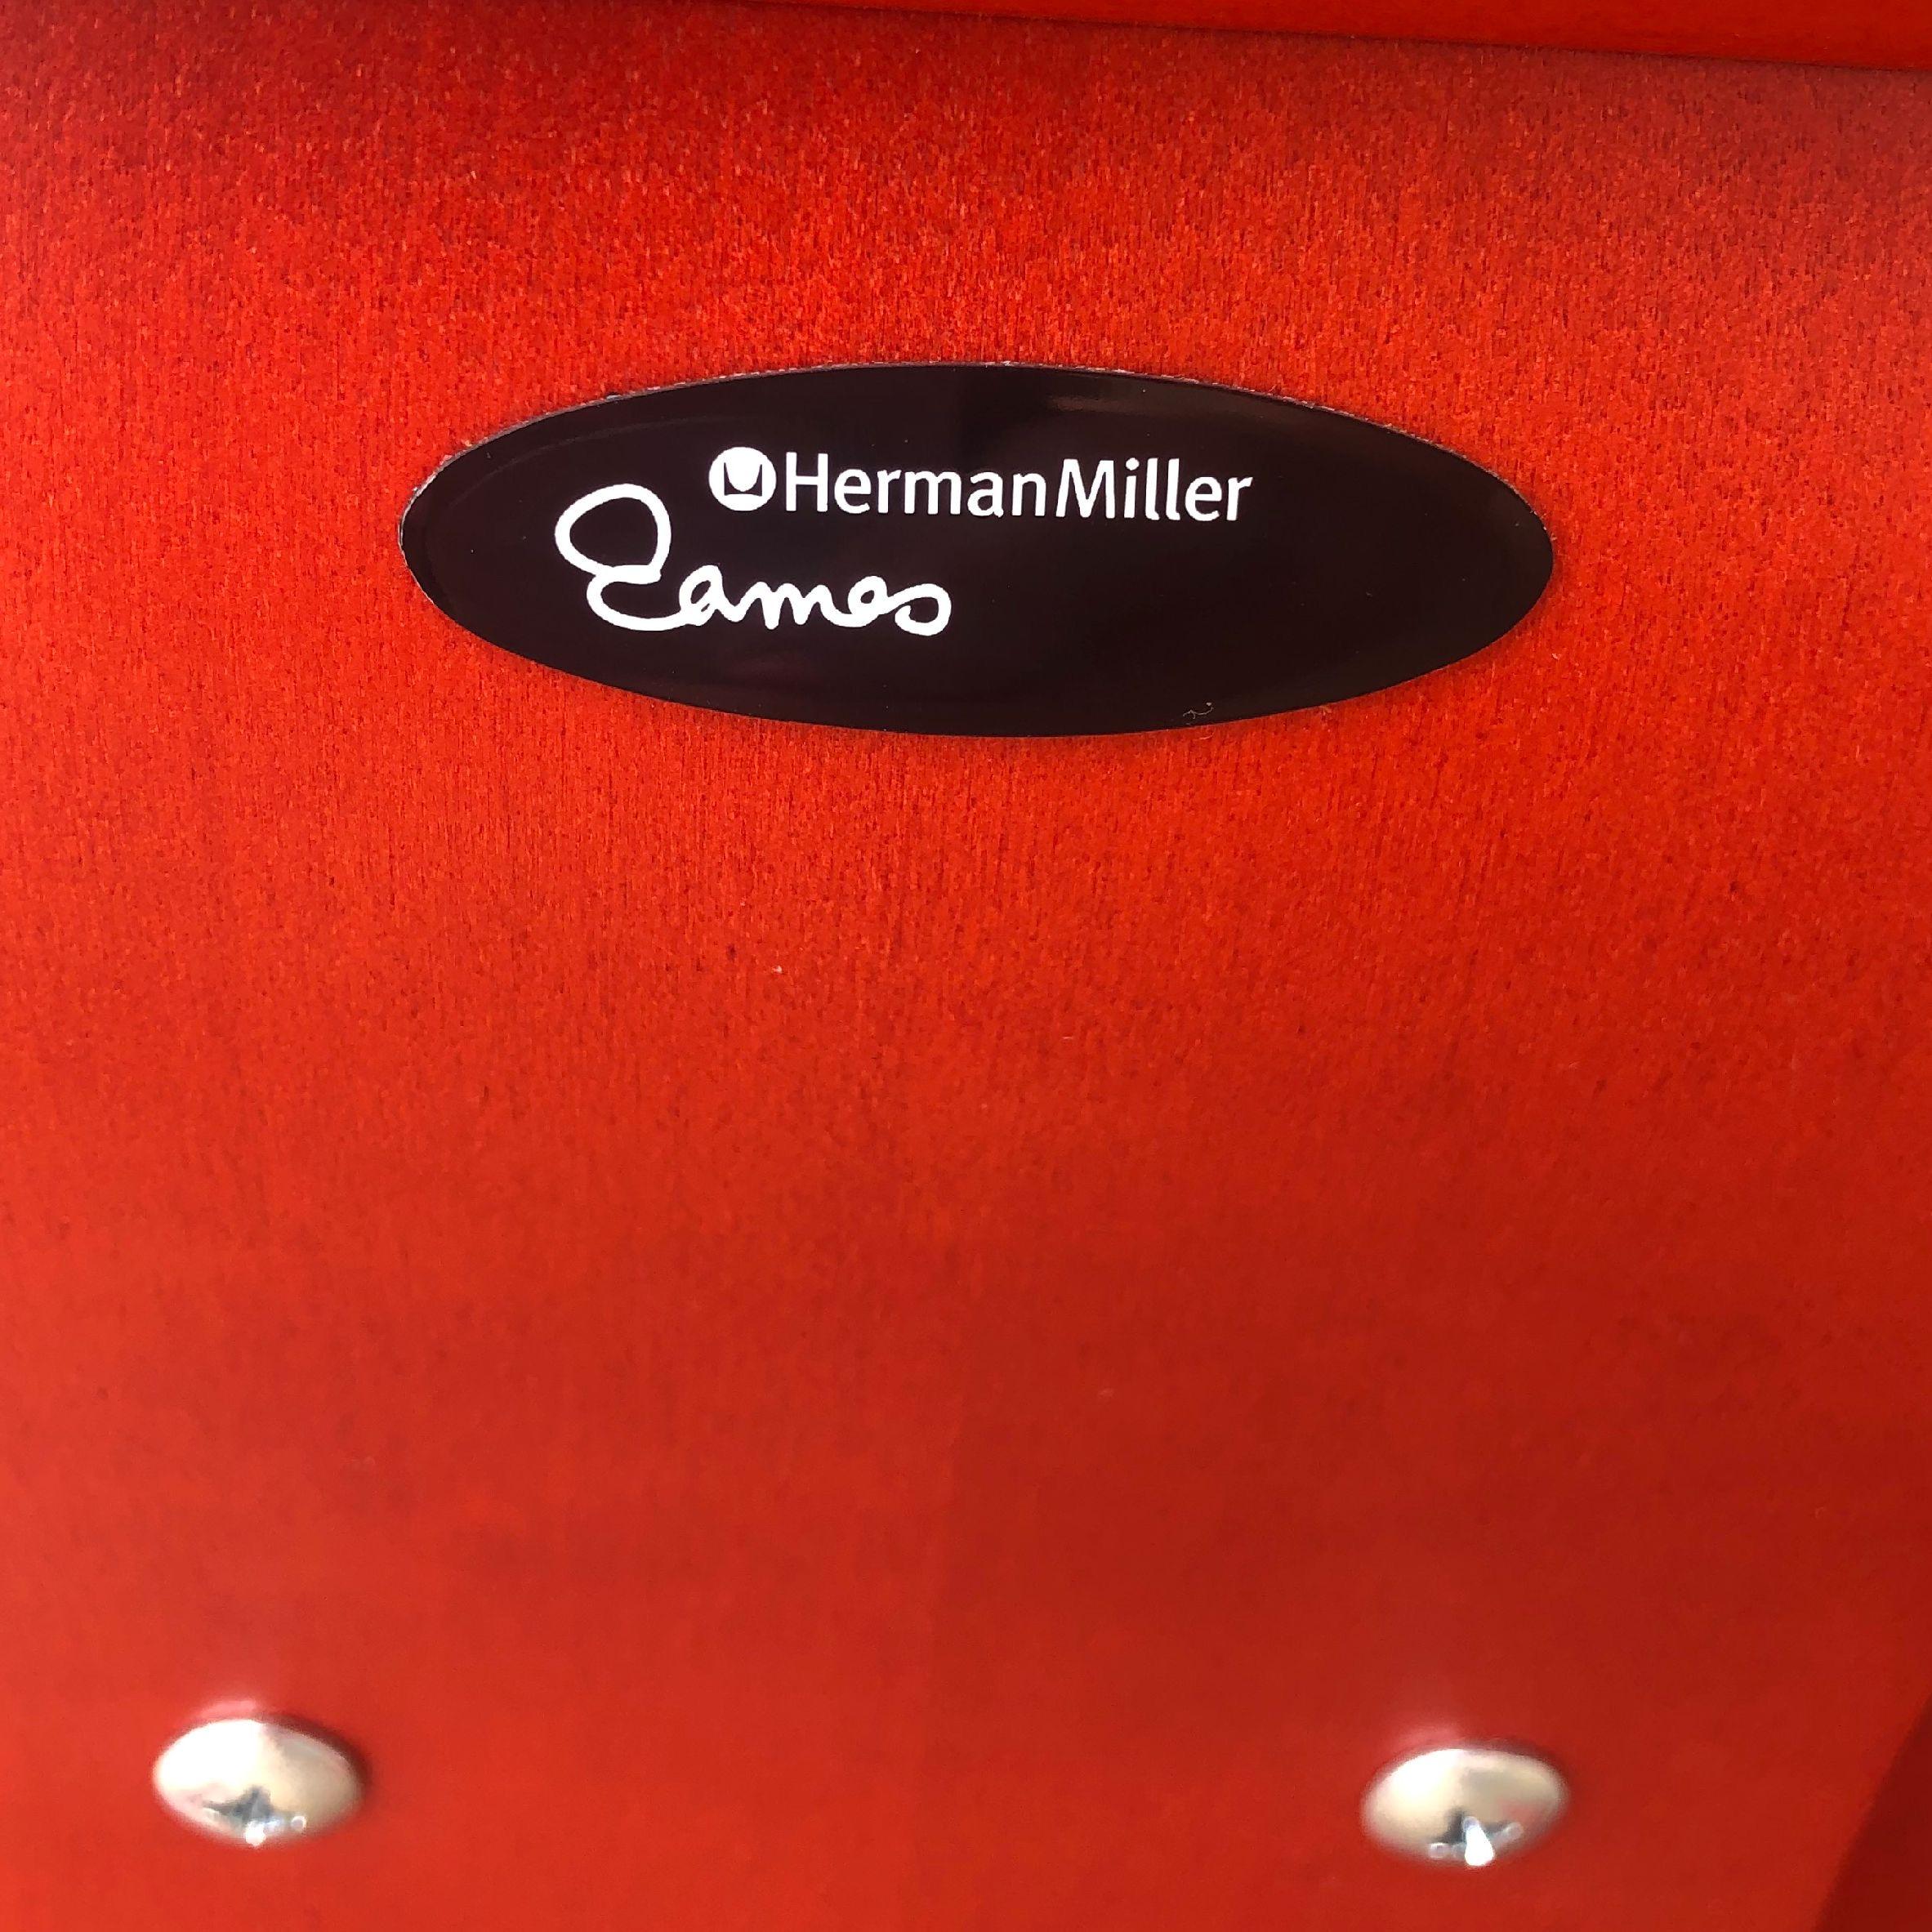 eames lcw red